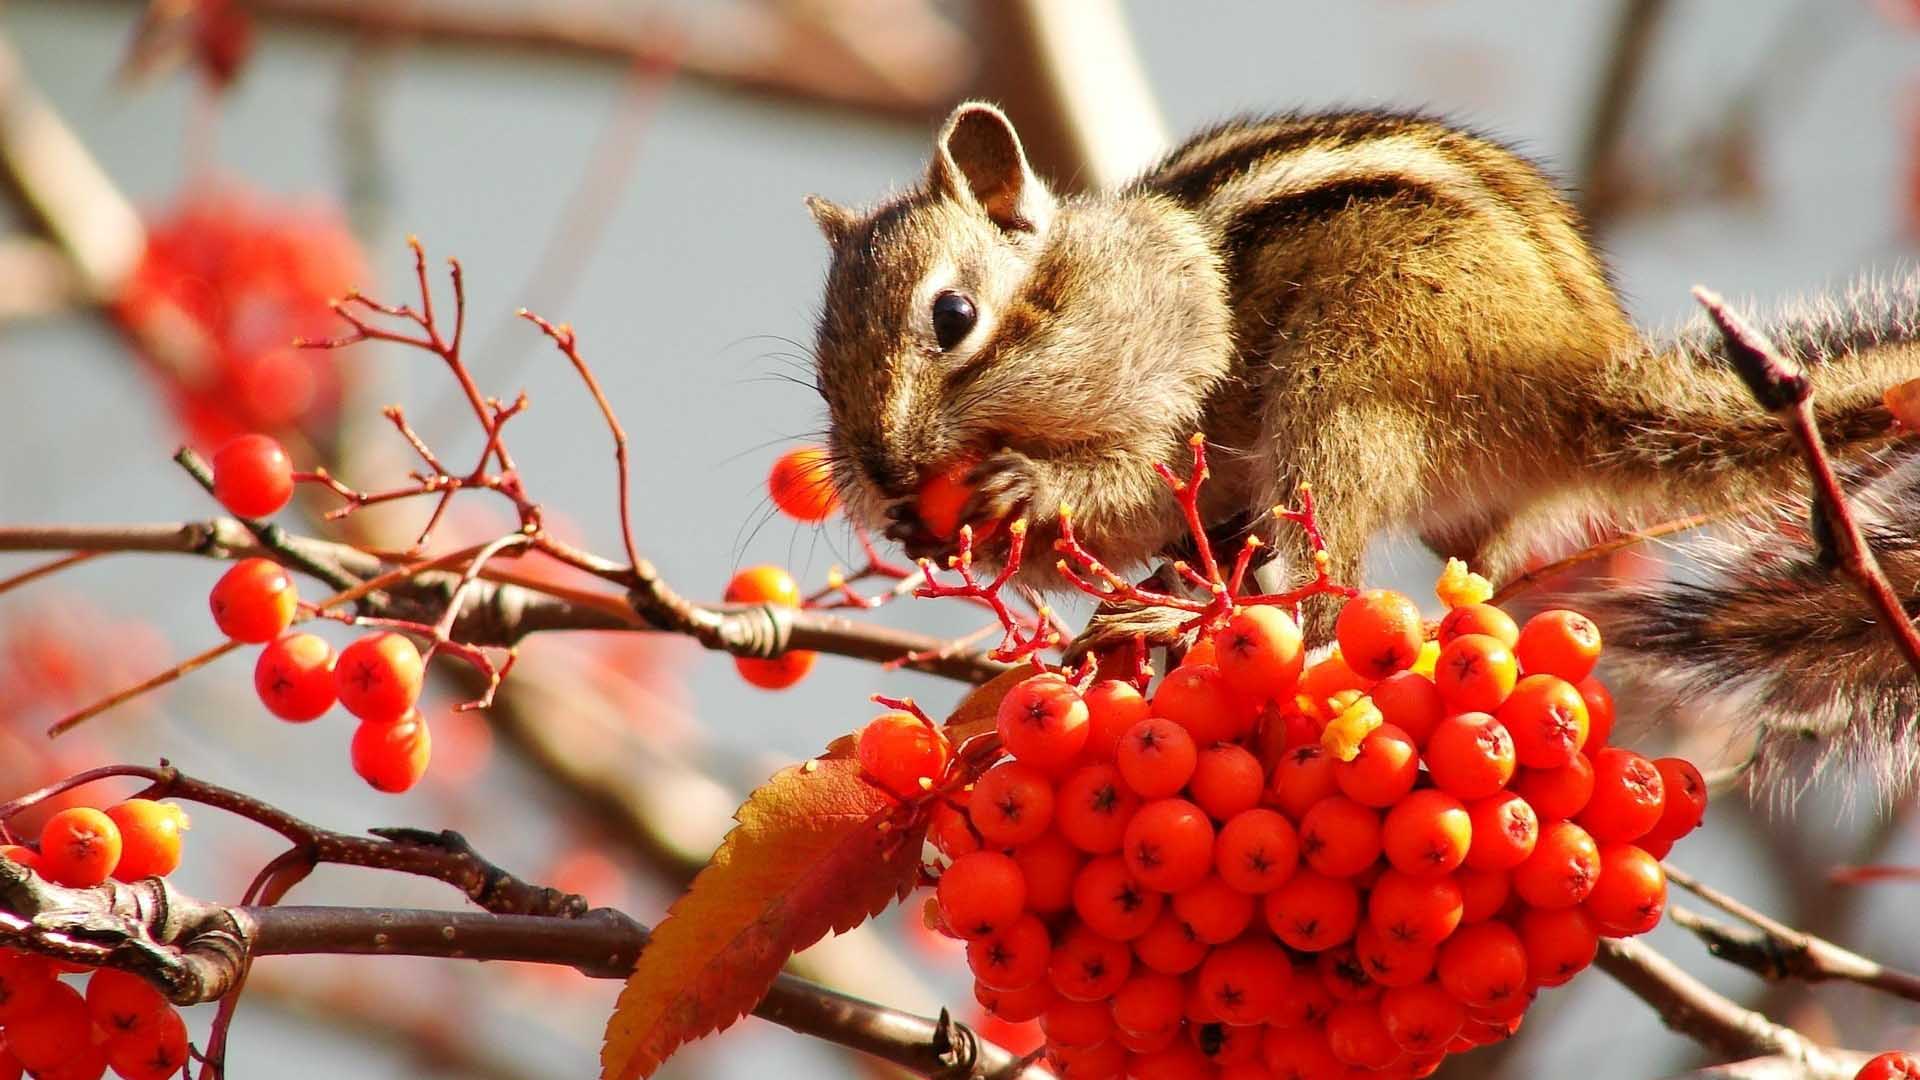 Squirrel With Red Plums Fruits 2K Squirrel